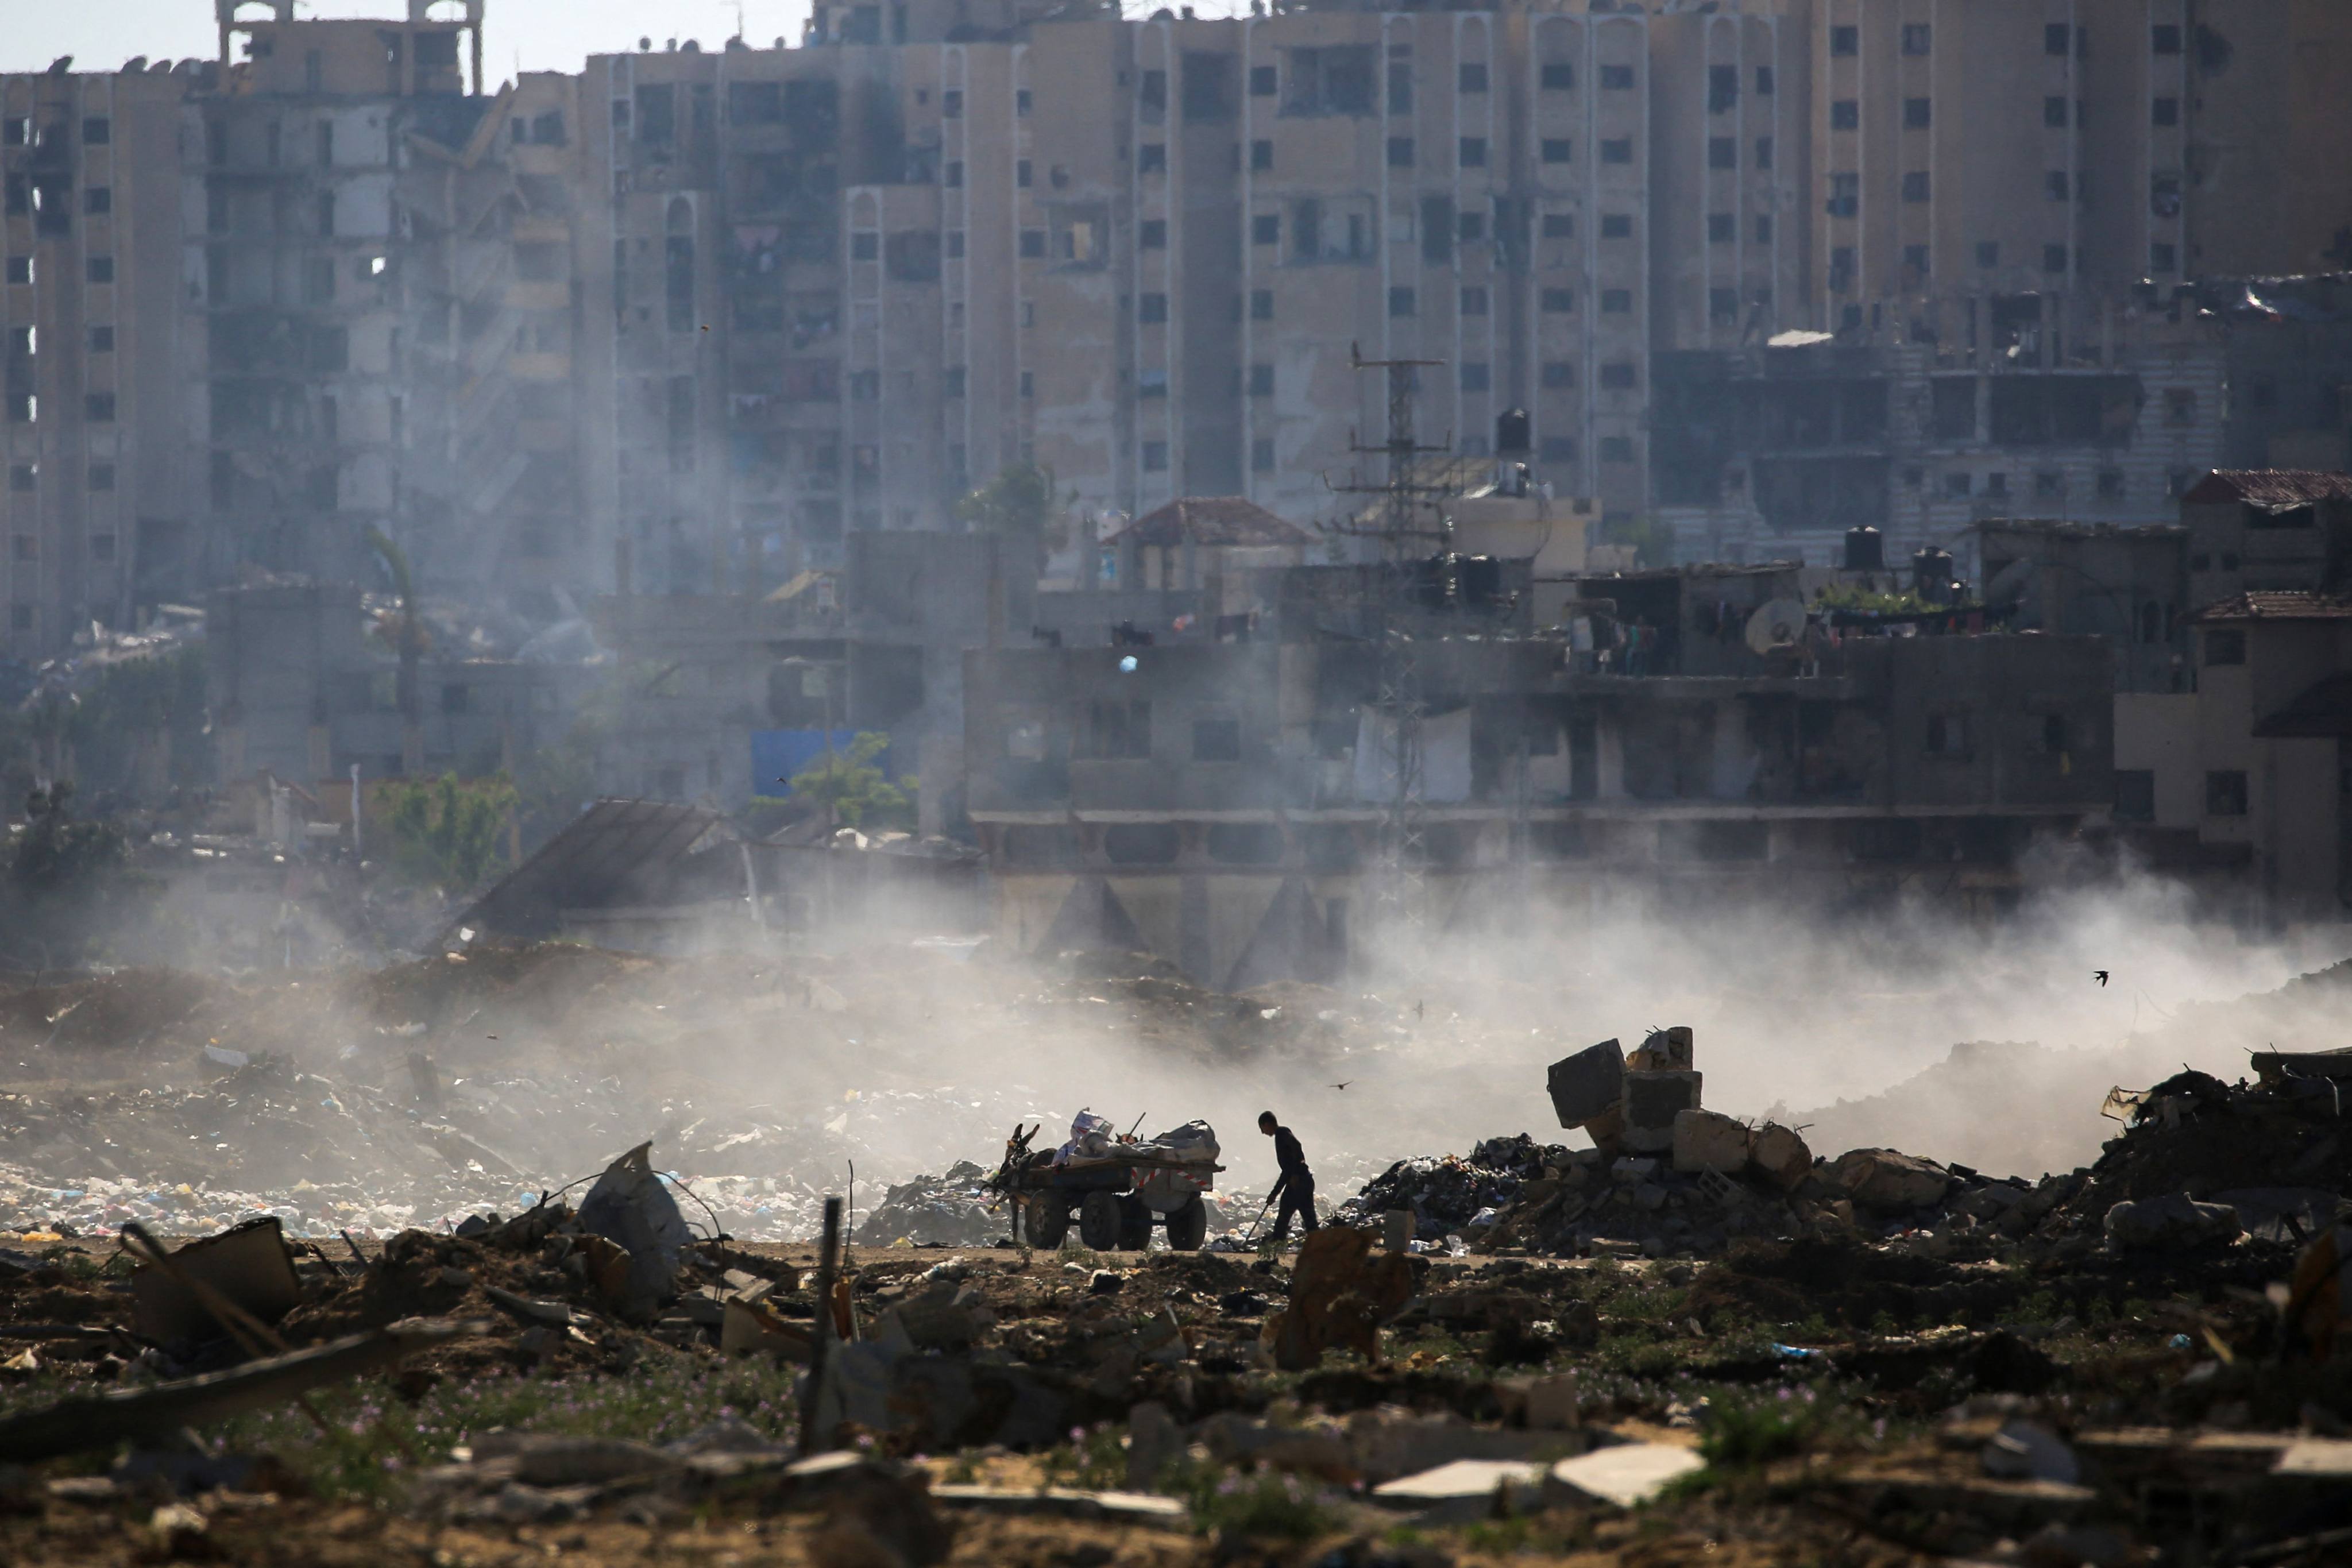 A Palestinian man salvages items atop of building rubble at al-Bureij camp in the central Gaza Strip. Photo: AFP